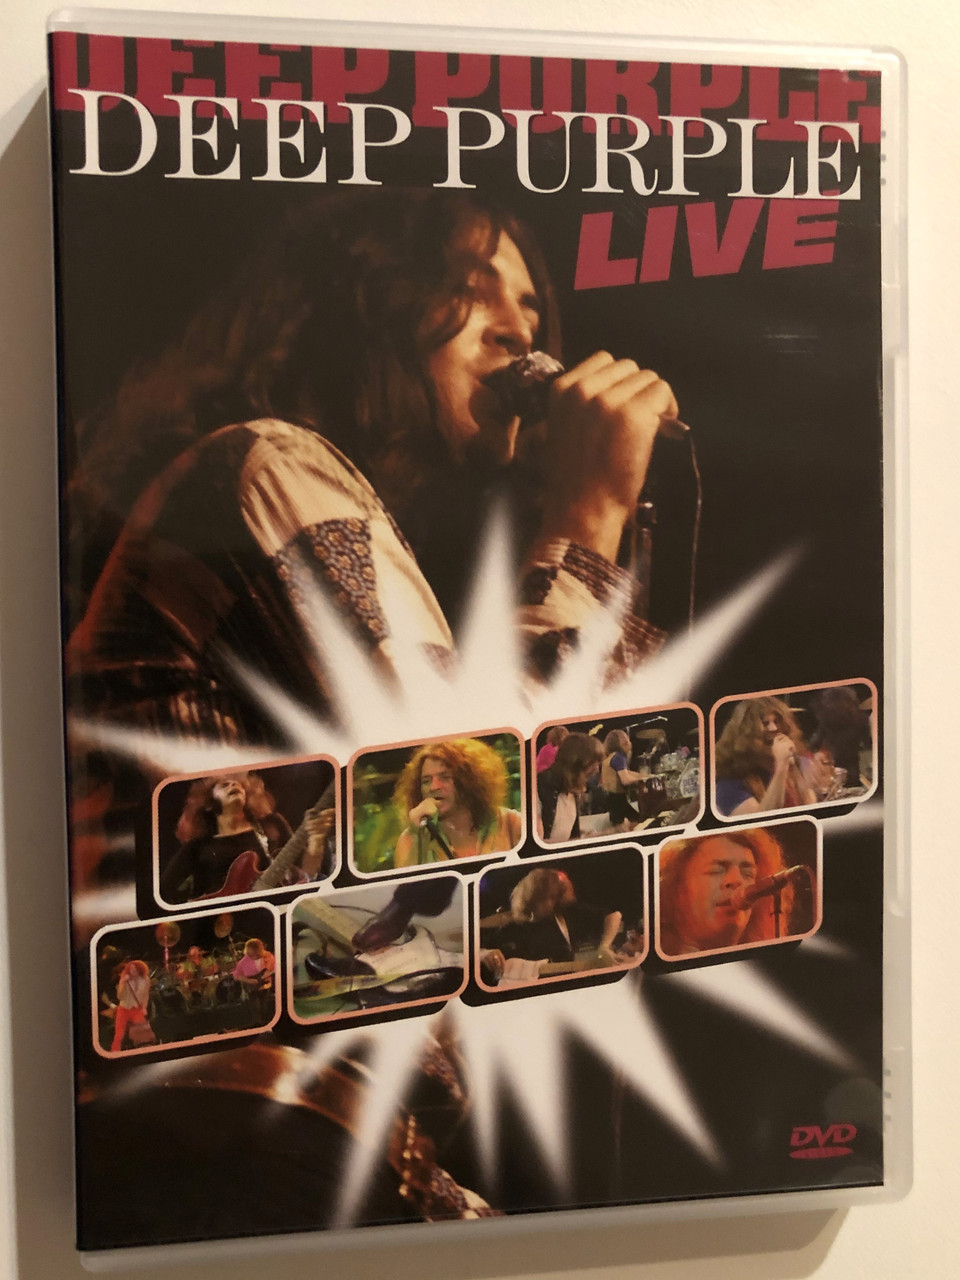 Deep Purple Live / A blistering gathering of sheer rock power / Ritchie  Blackmore on guitar, Jon Lord on keyboards, Roger Glover on bass, and Ian  Paice on drums / DVD - bibleinmylanguage